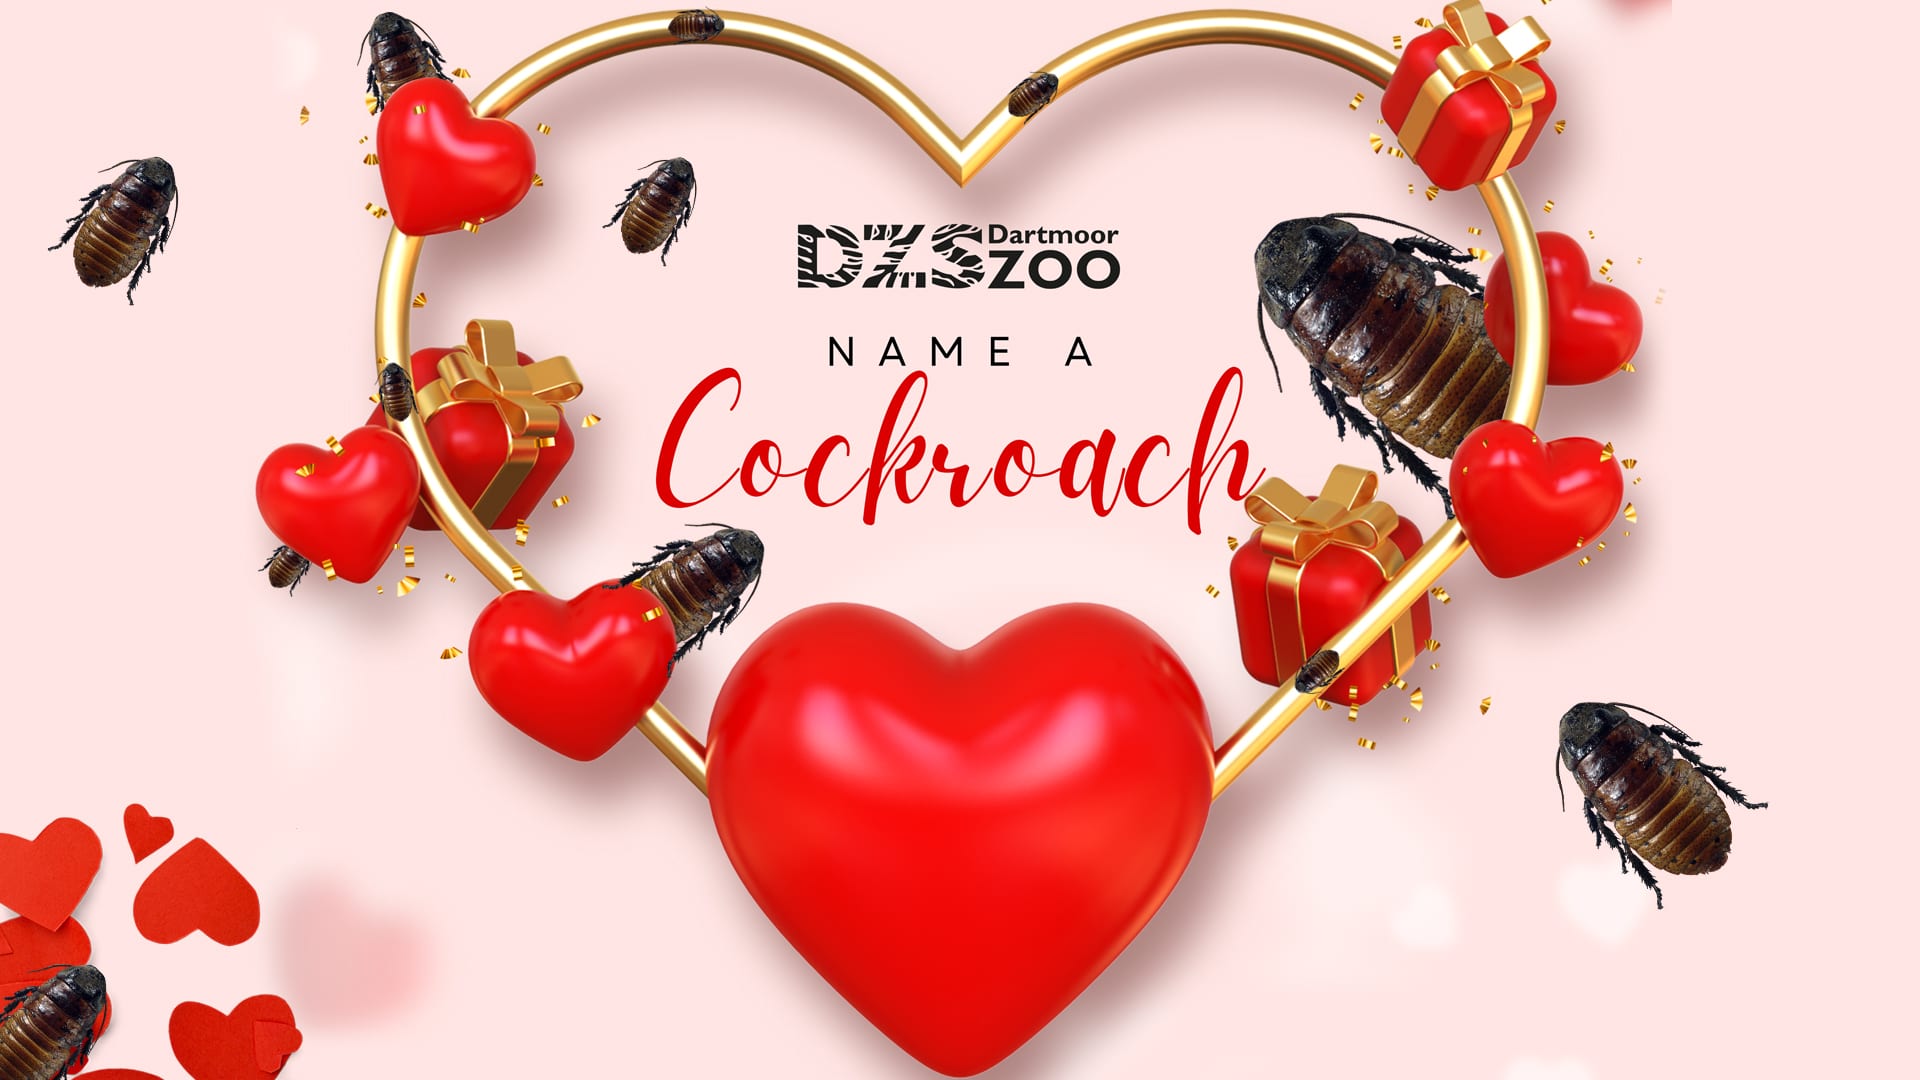 Valentine’s Day – name a cockroach!